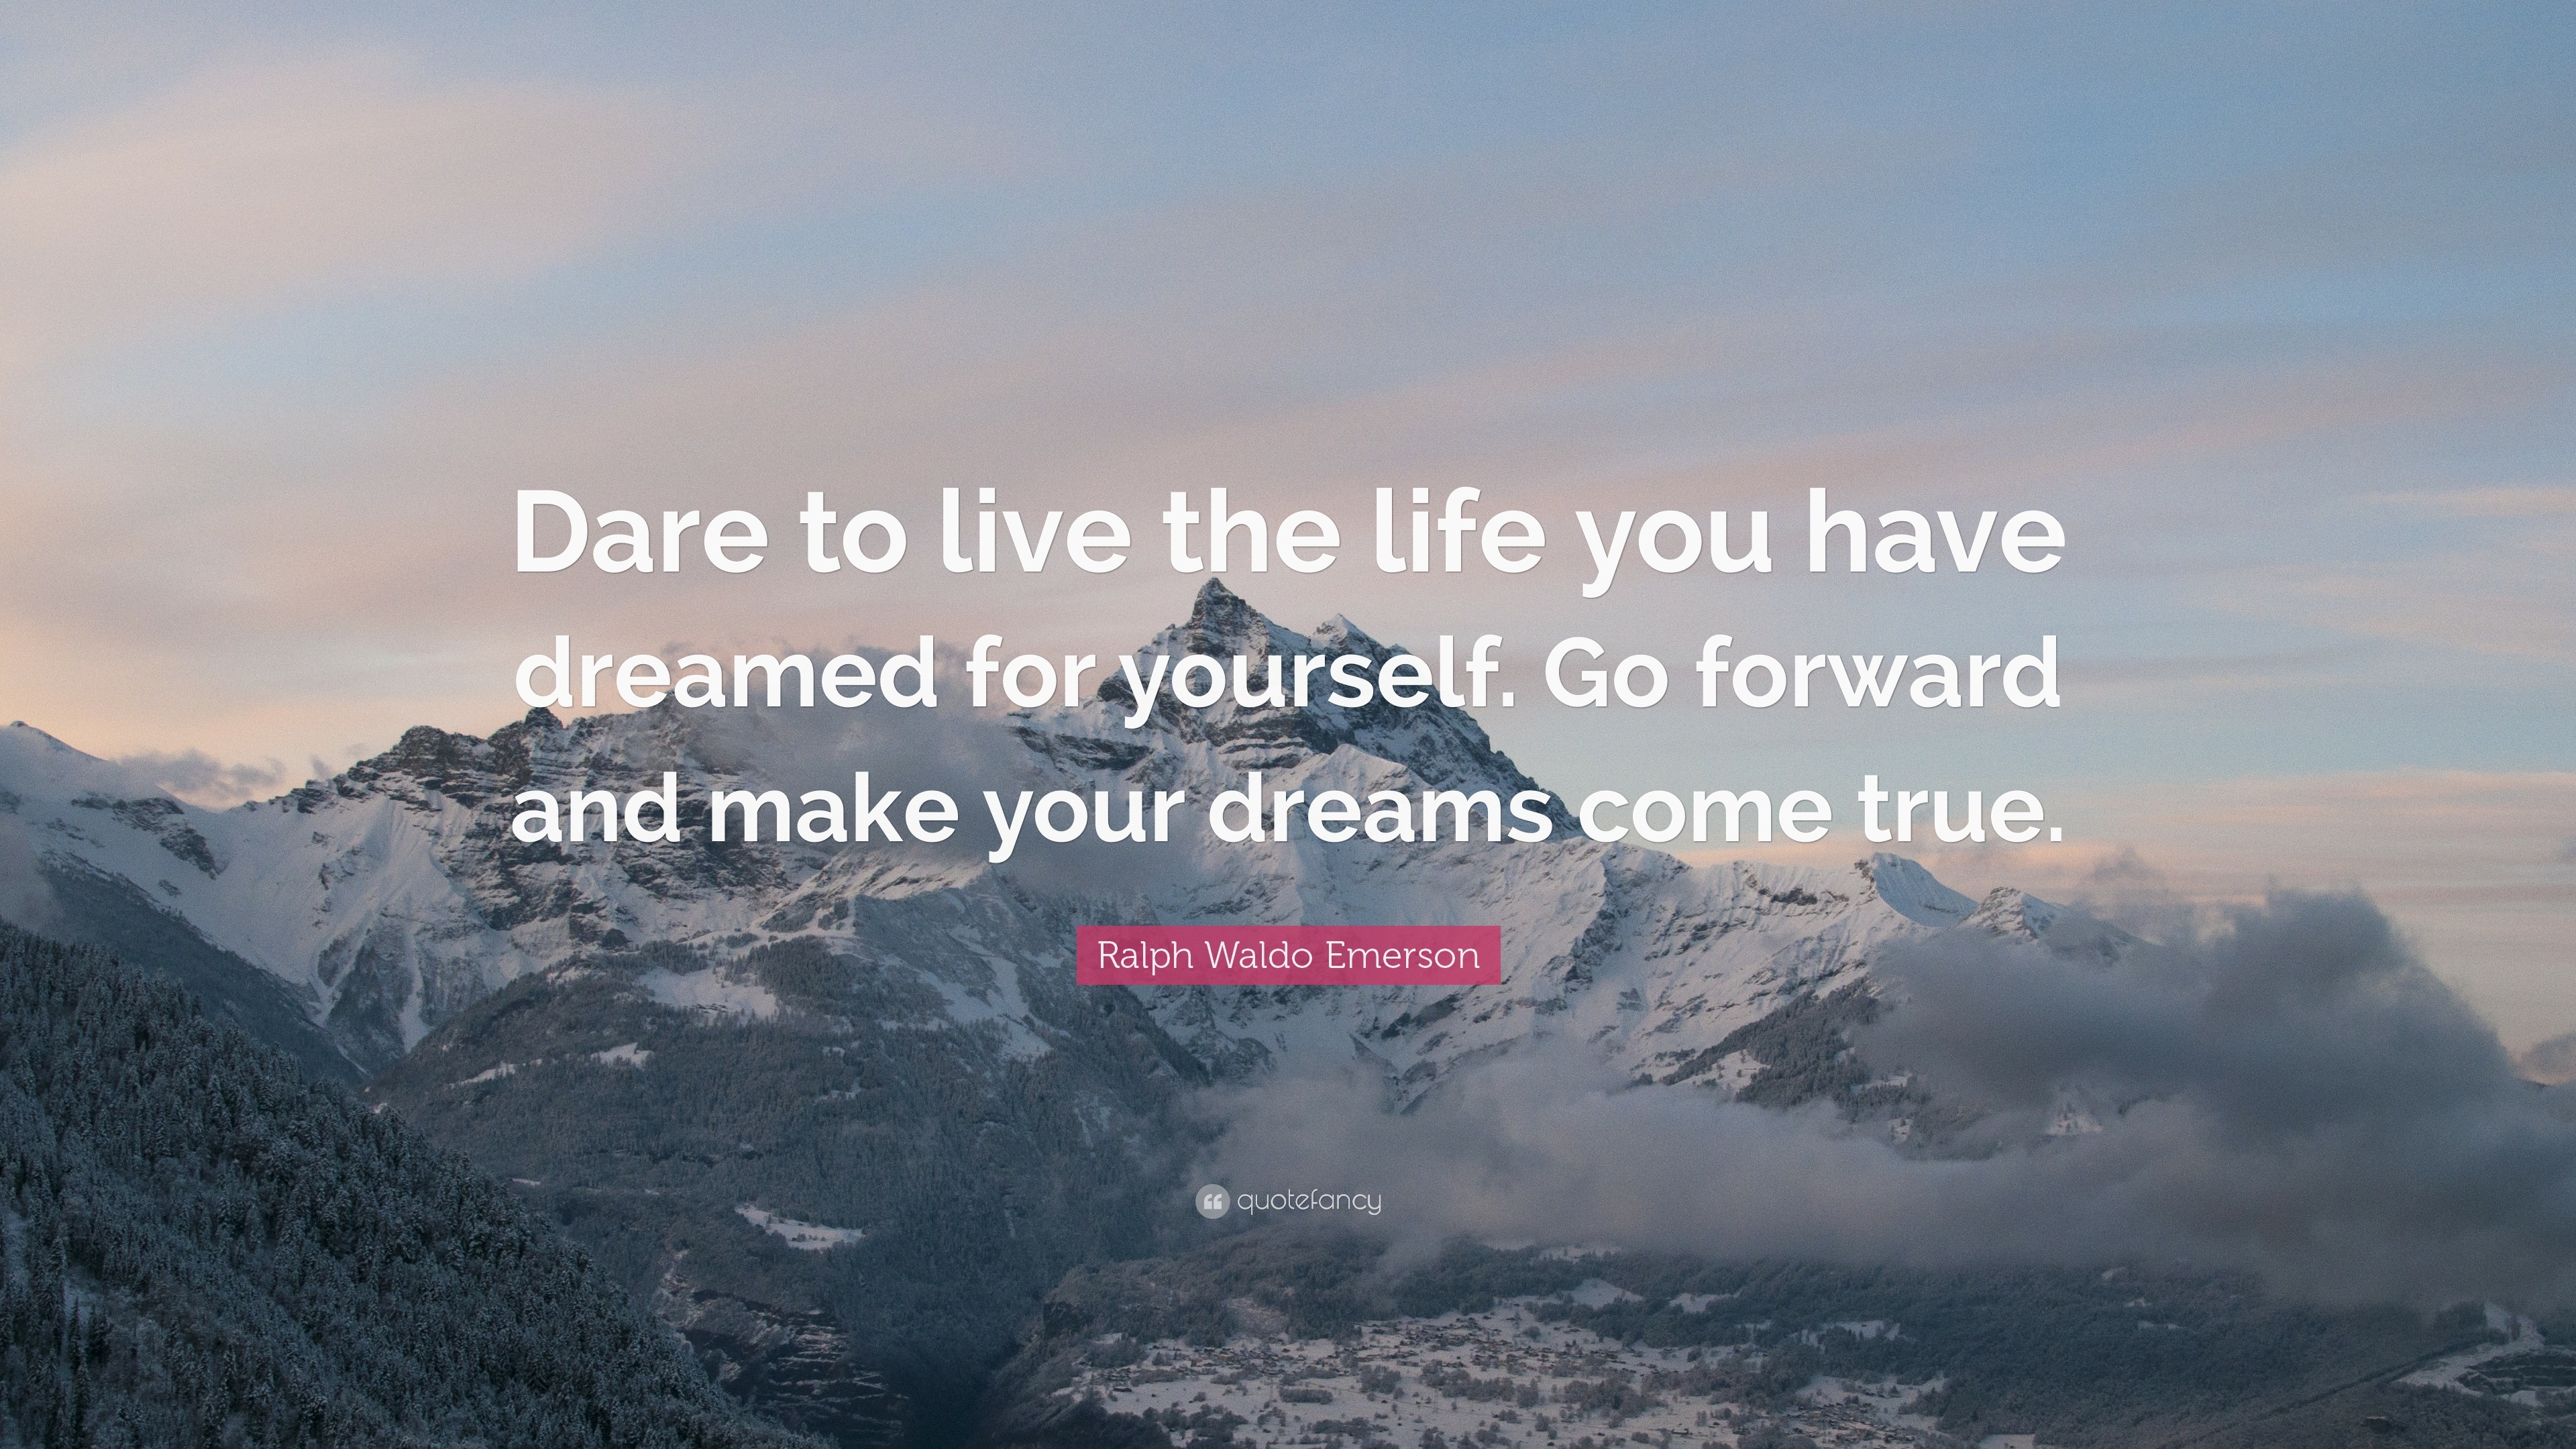 https://quotefancy.com/media/wallpaper/3840x2160/25860-Ralph-Waldo-Emerson-Quote-Dare-to-live-the-life-you-have-dreamed.jpg